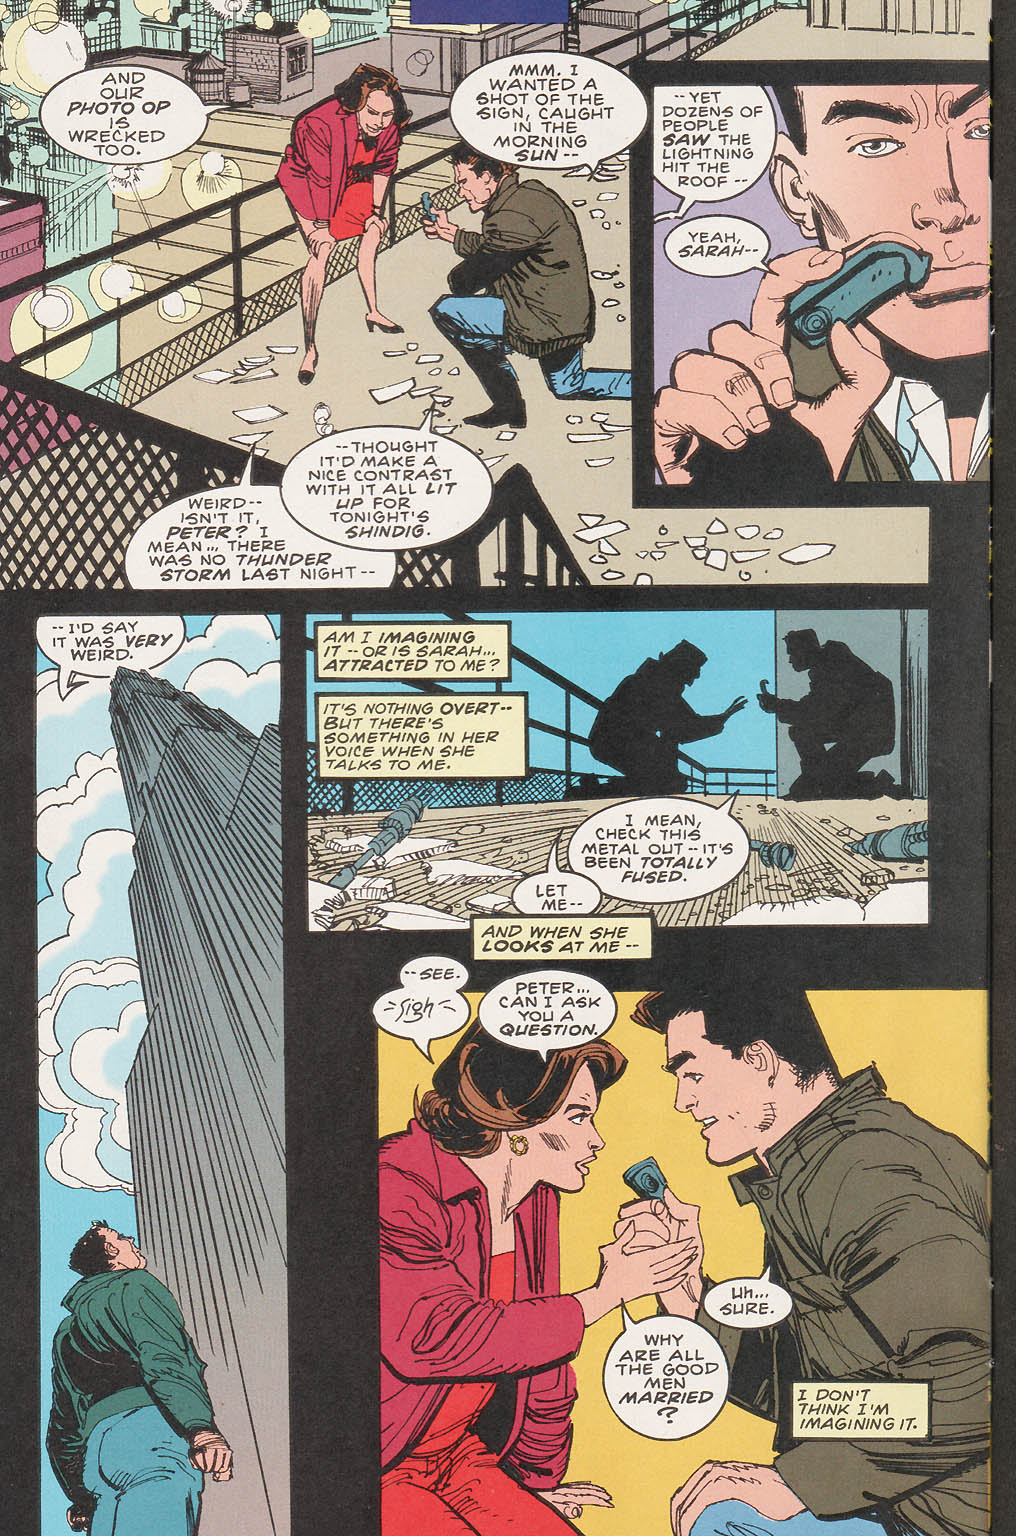 Spider-Man (1990) 39_-_Light_The_Night_Part_2_of_3 Page 2